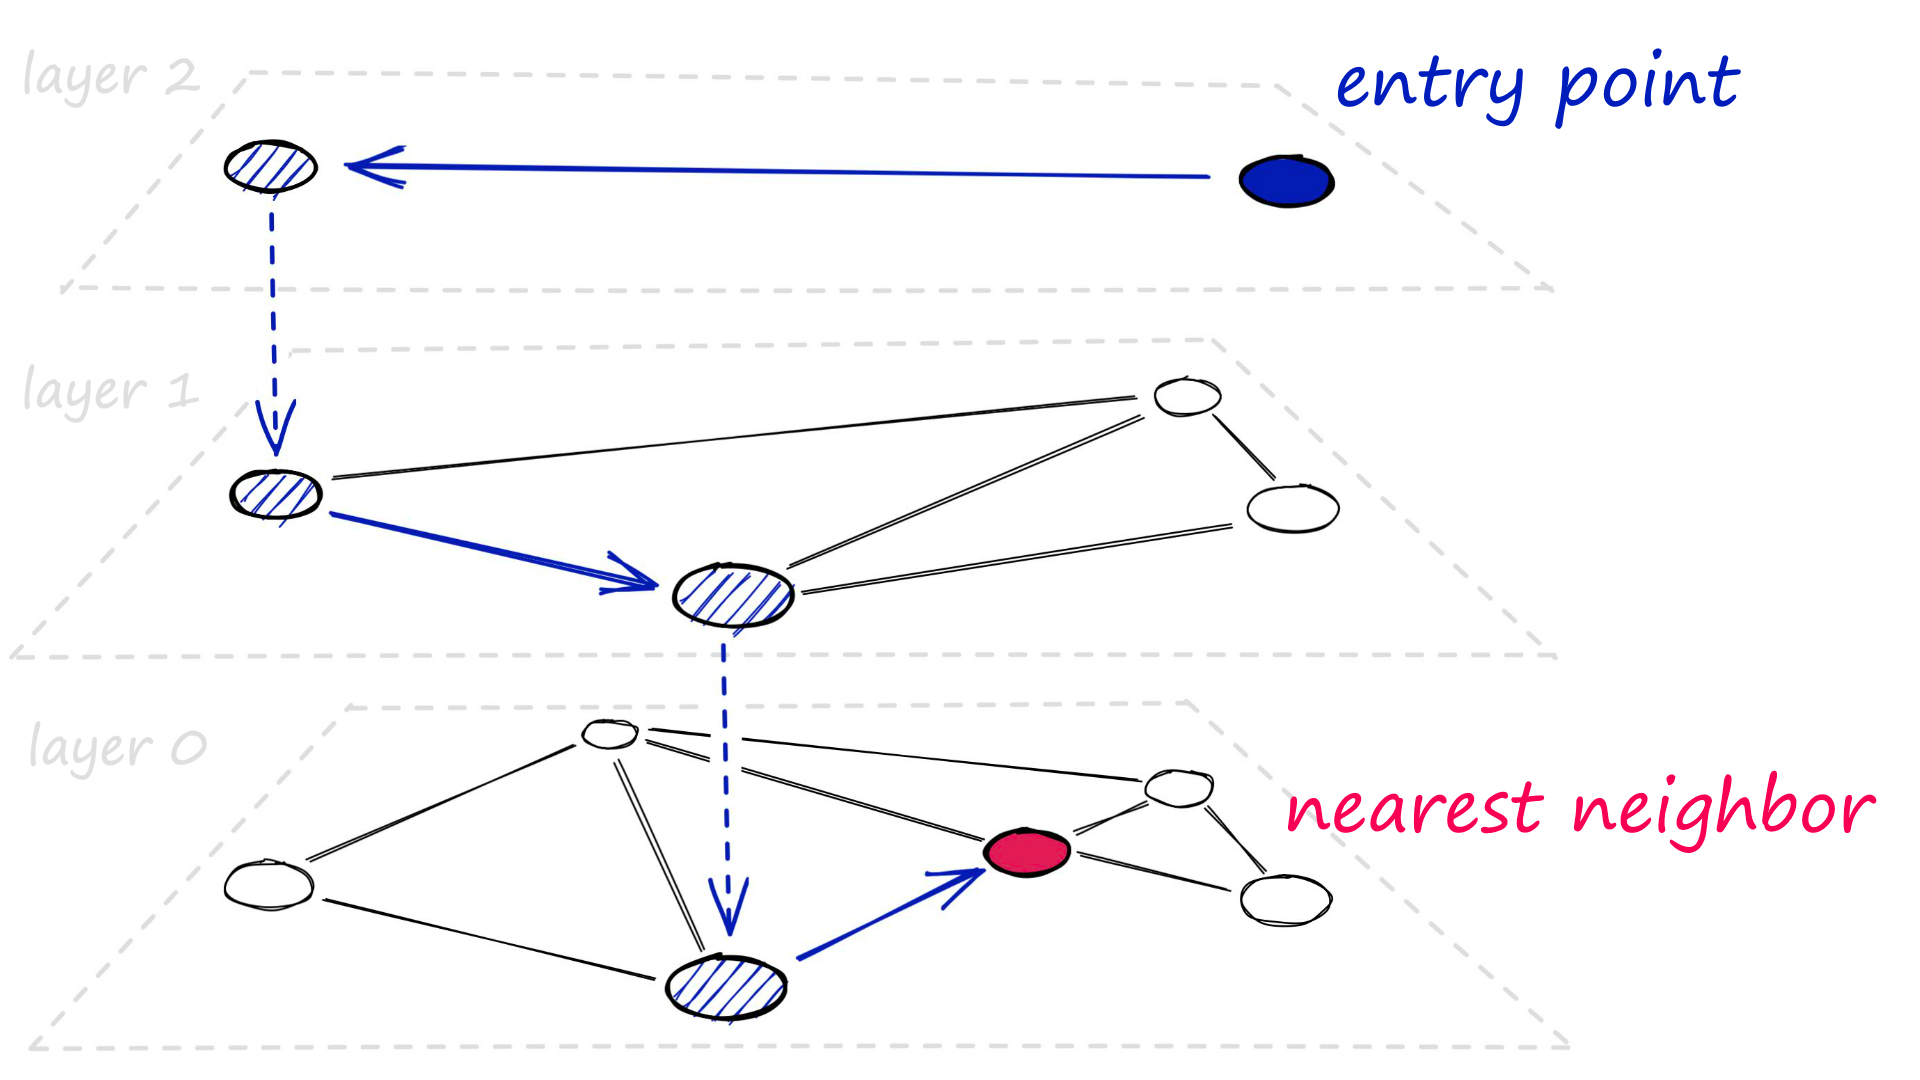 HNSW graphs break the typical graph containing both long-range and short-range links into multiple layers (hierarchies). During the search, we begin at the highest layer, which consists of long-range links. As we move down through each layer, the links become more granular.